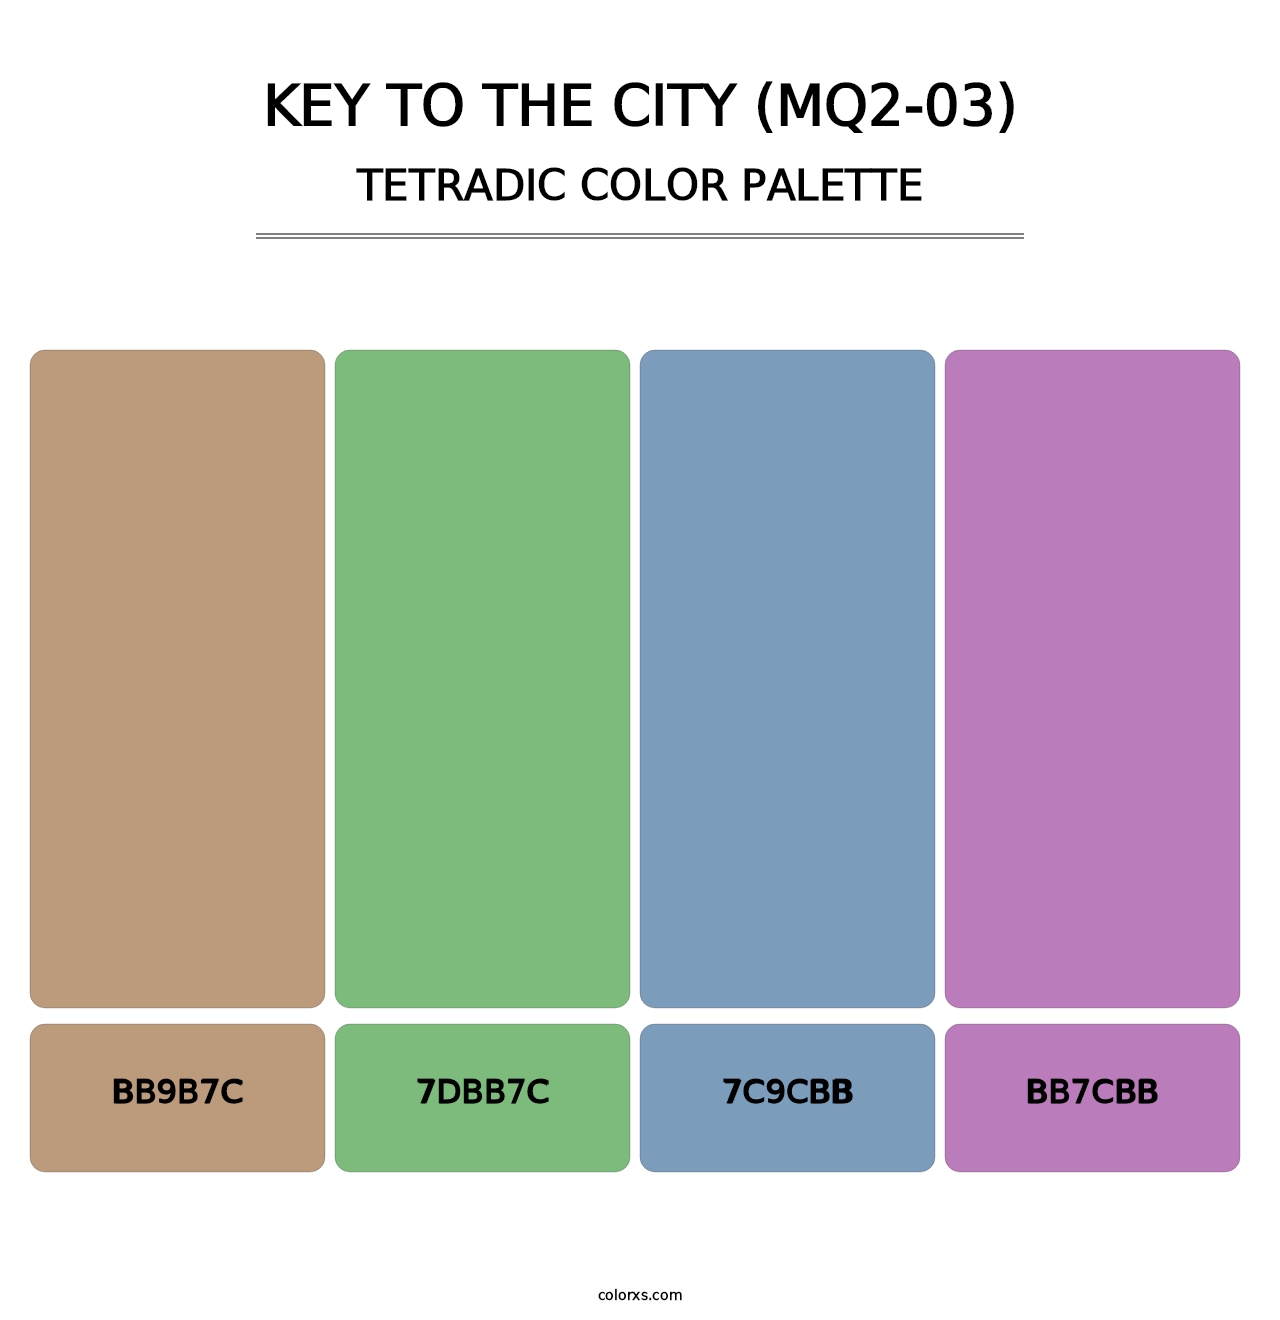 Key To The City (MQ2-03) - Tetradic Color Palette